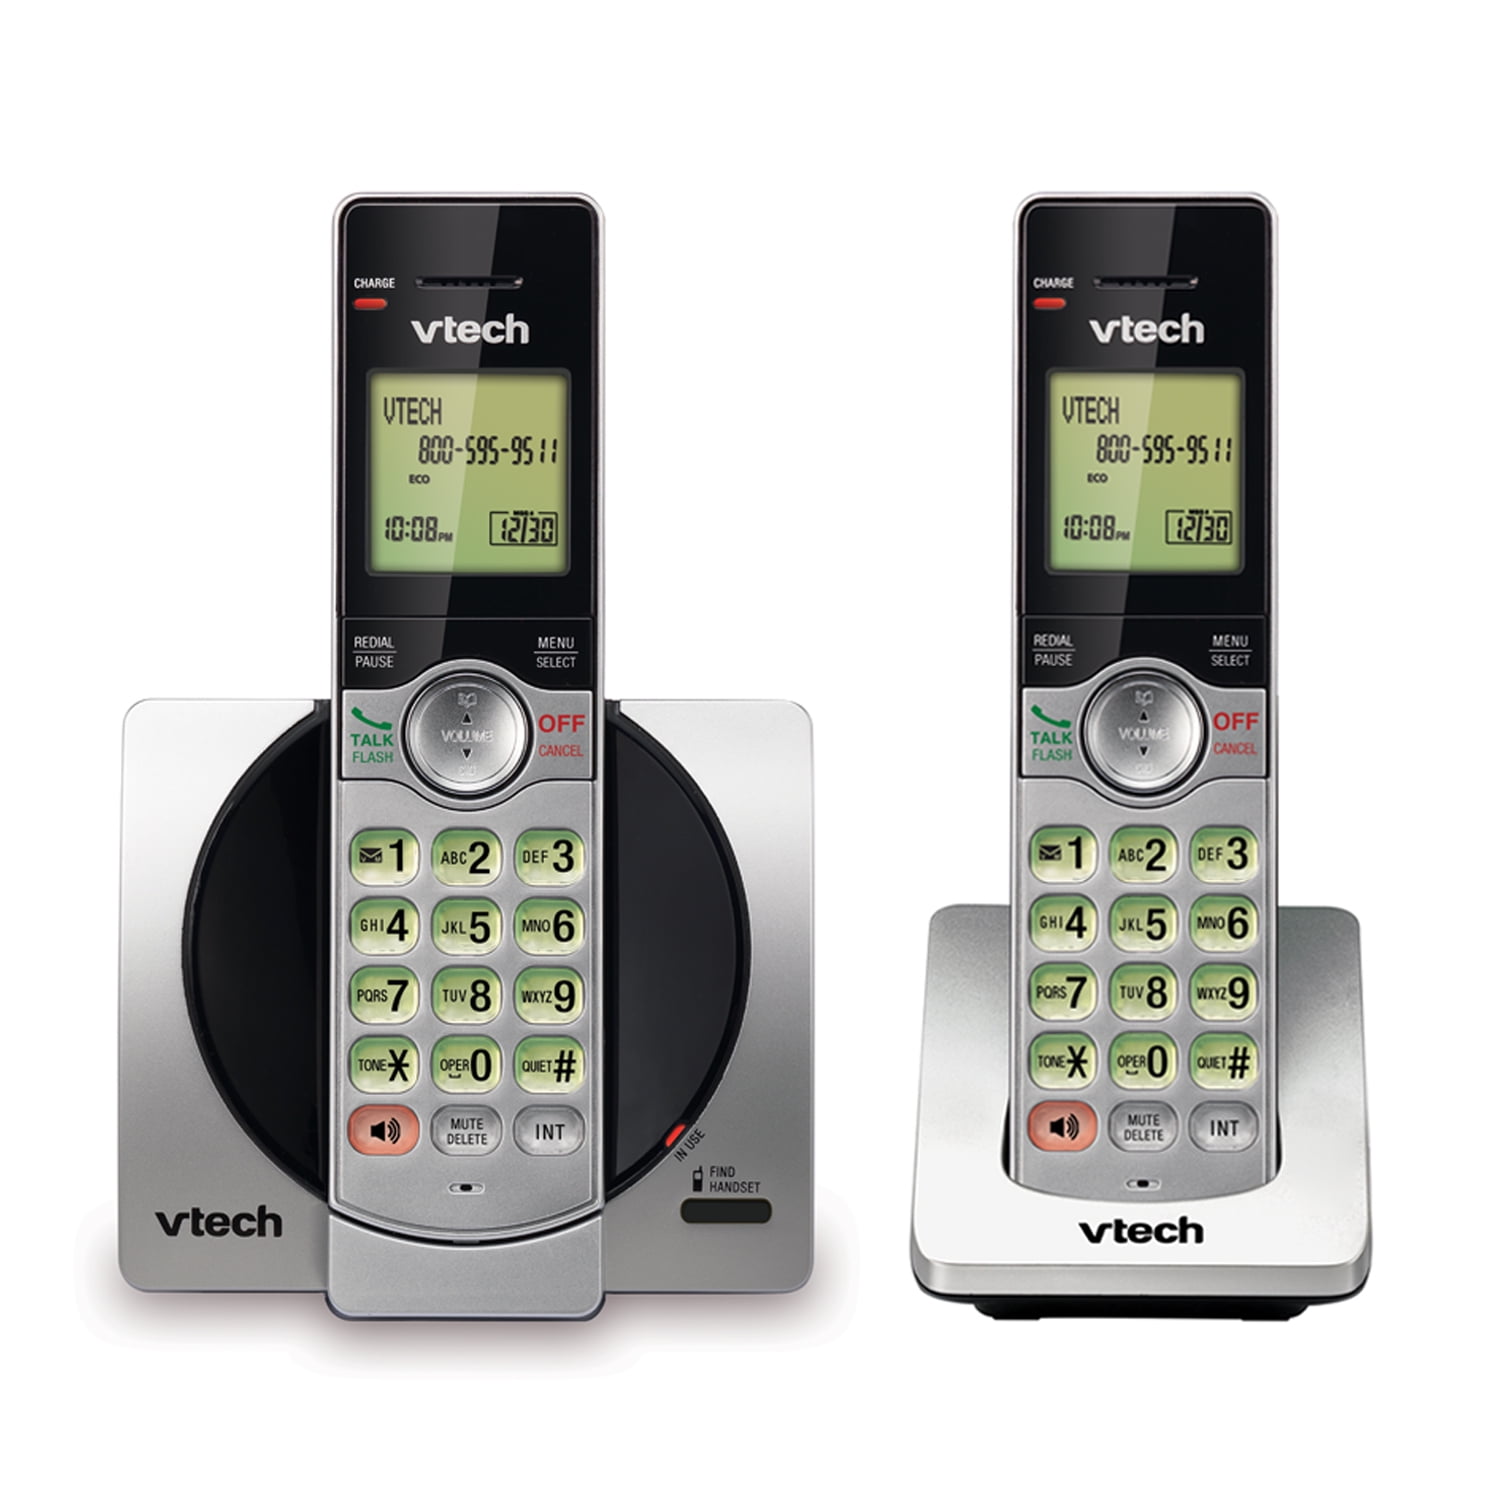 BRAND NEW VTech CS6114 DECT 6.0 Cordless Phone with Caller ID/Call Waiting White 